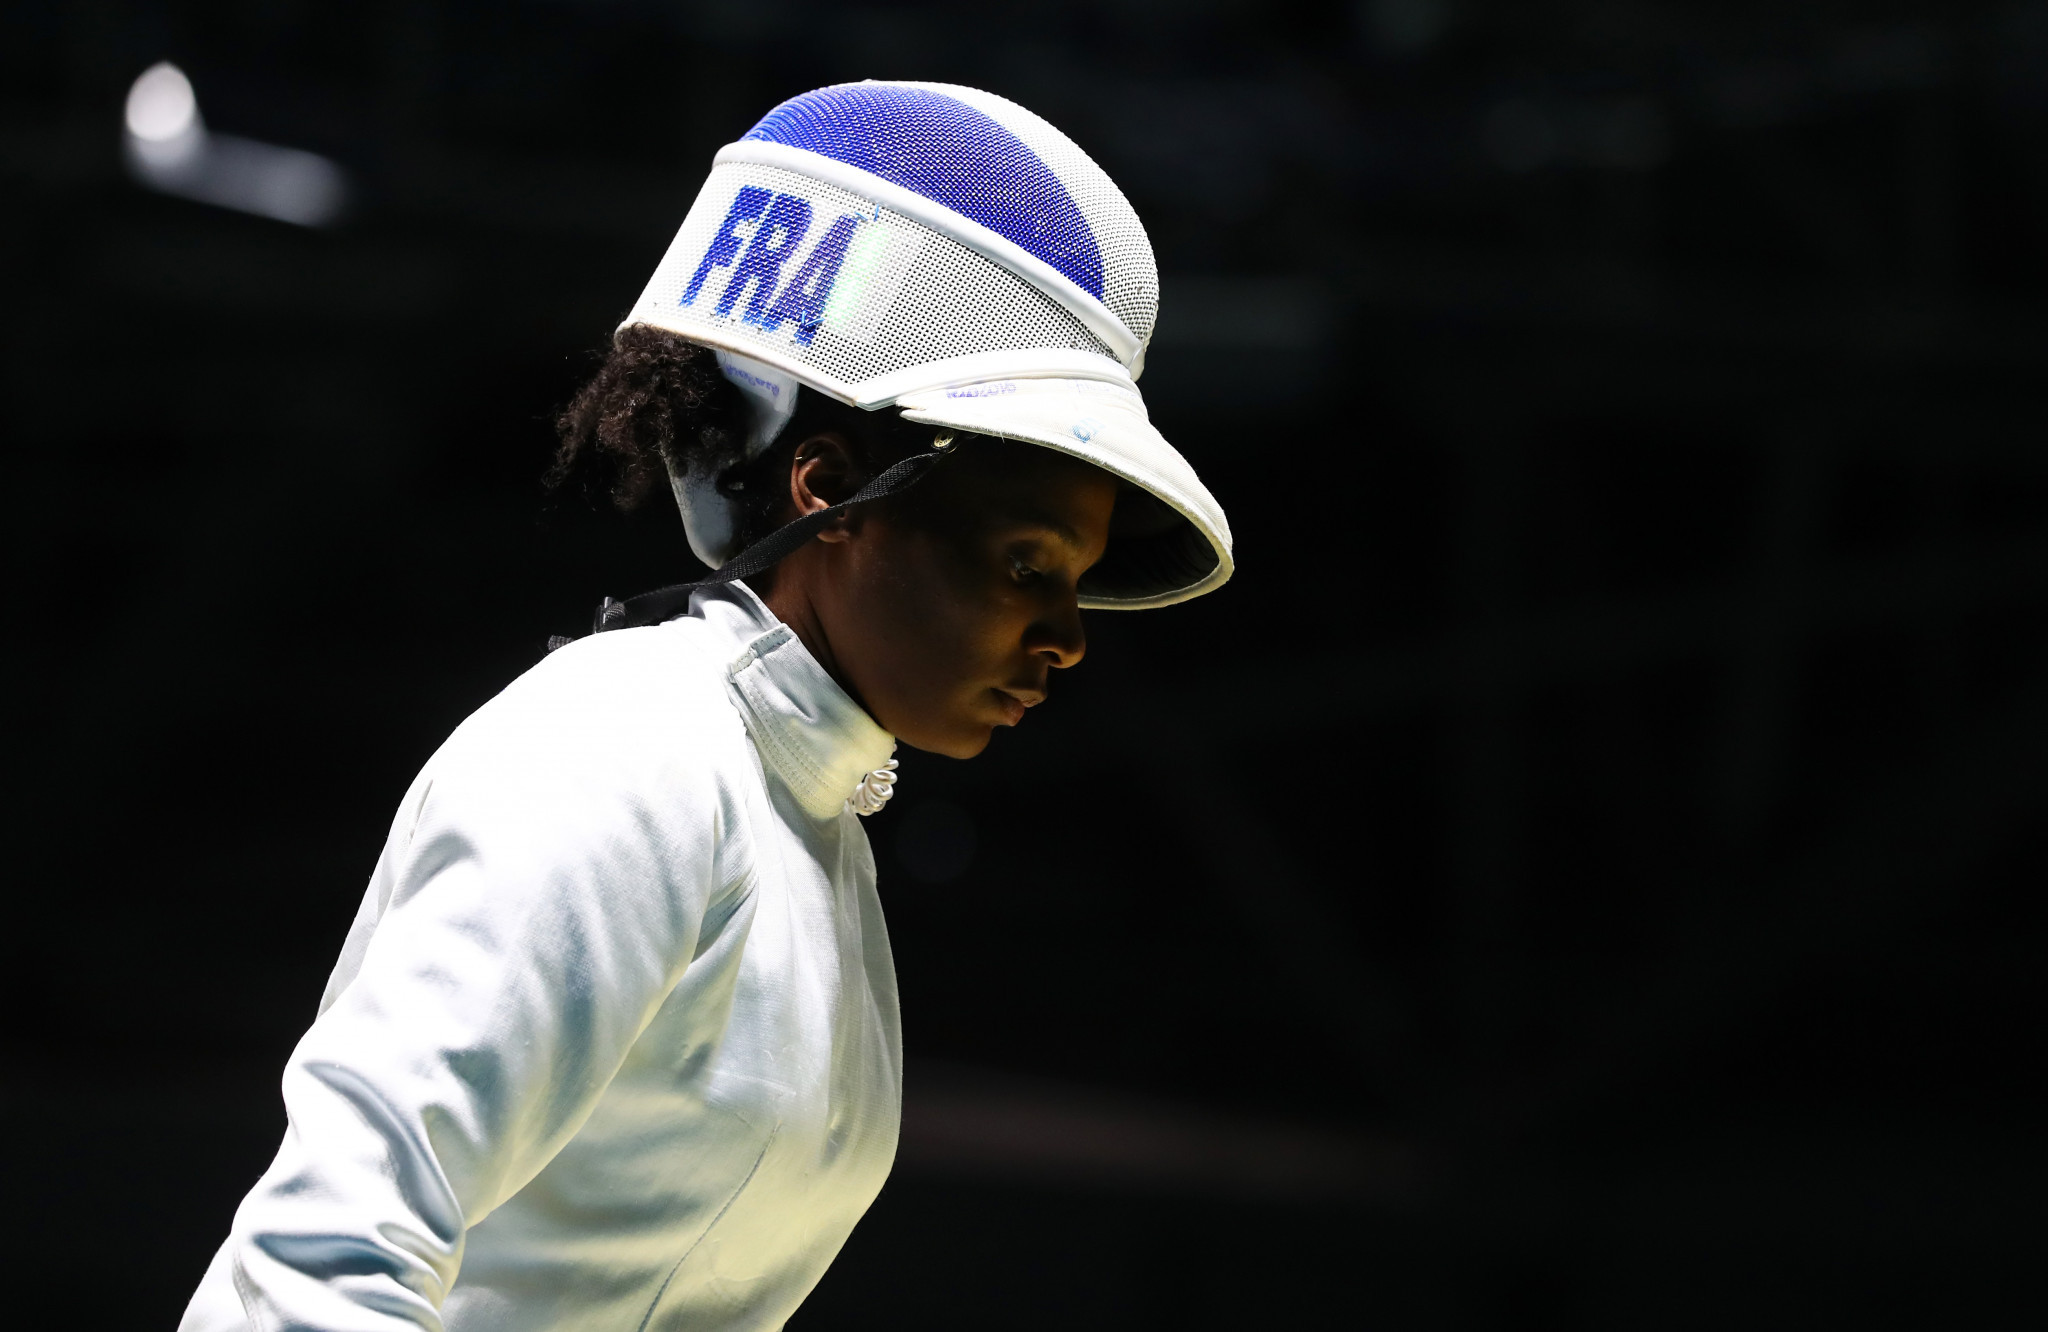 Marie-Florence Candassamy recovered from a defeat in the individual final to help France to women's team épée gold at the FIE World Cup in Barcelona ©Getty Images